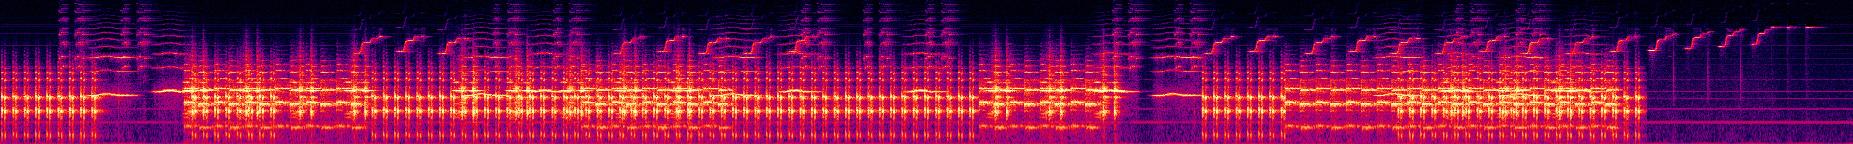 A Game of Chess - 11. Game A - Spectrogram.jpg